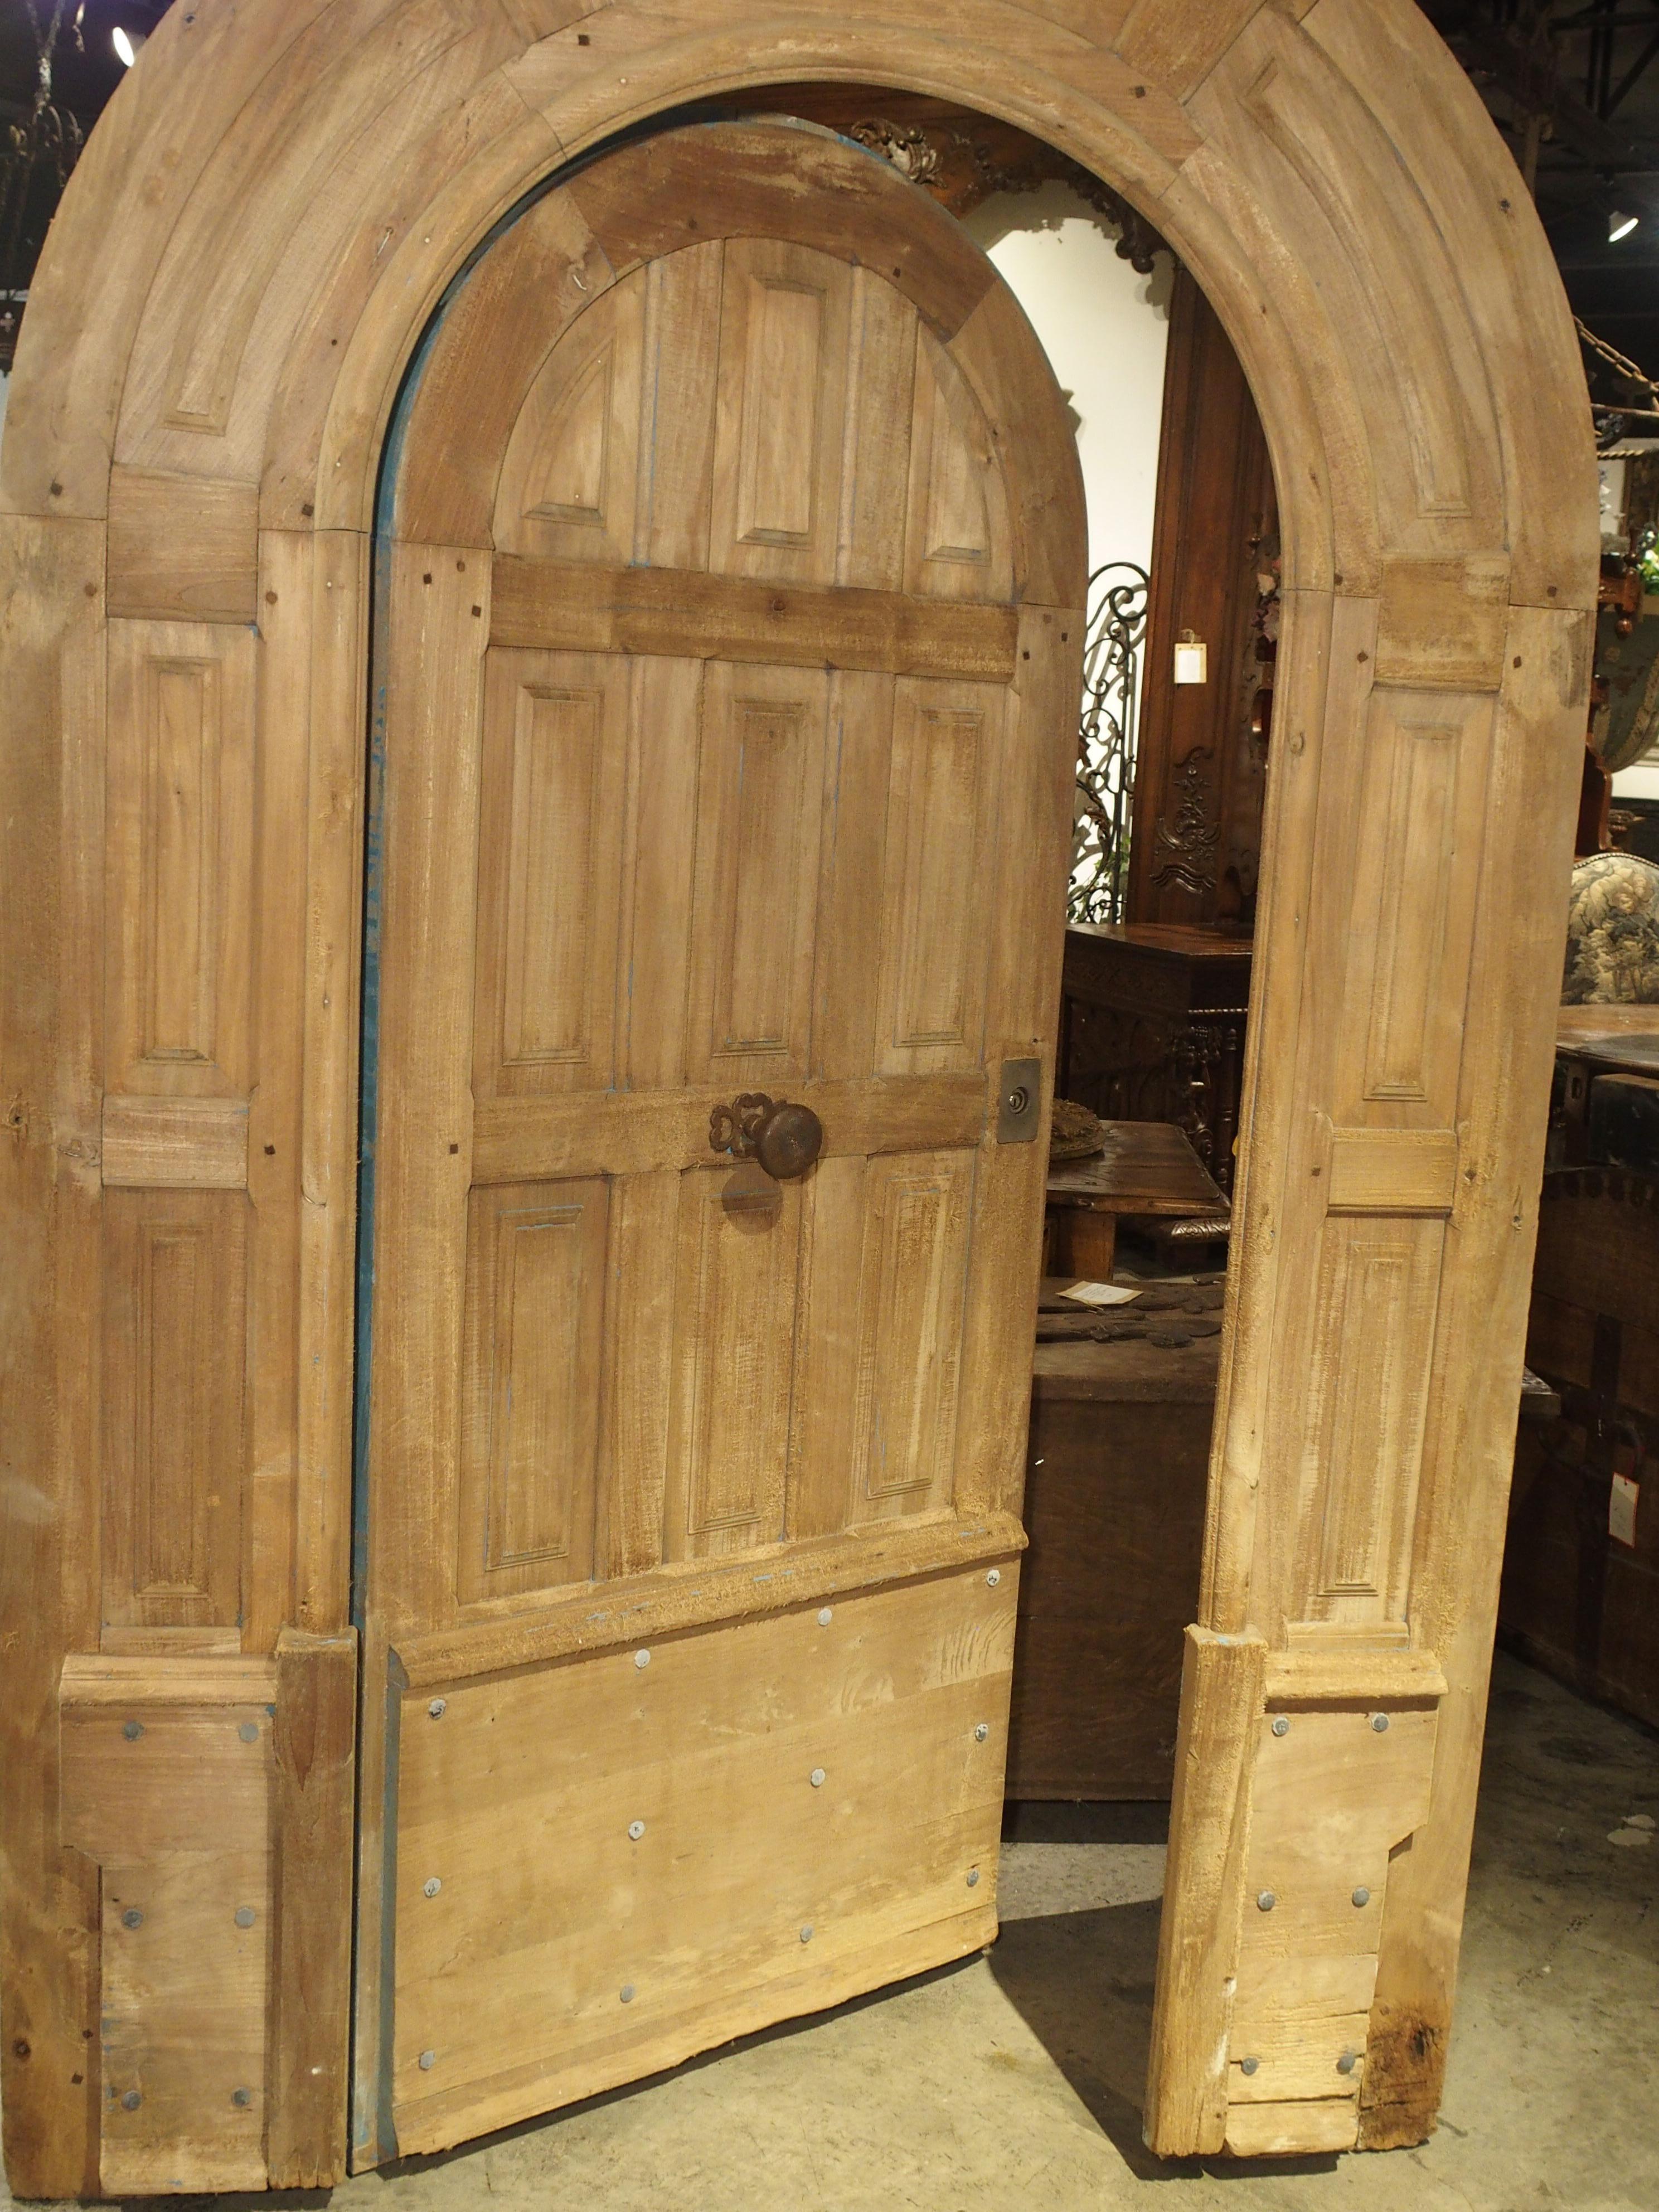 From France, this amazing arched entry door is made from stripped French oak. The door is still attached to its original arched surround, and the decoration consists of simple, triple raised panel moldings going down three quarters of the door. The